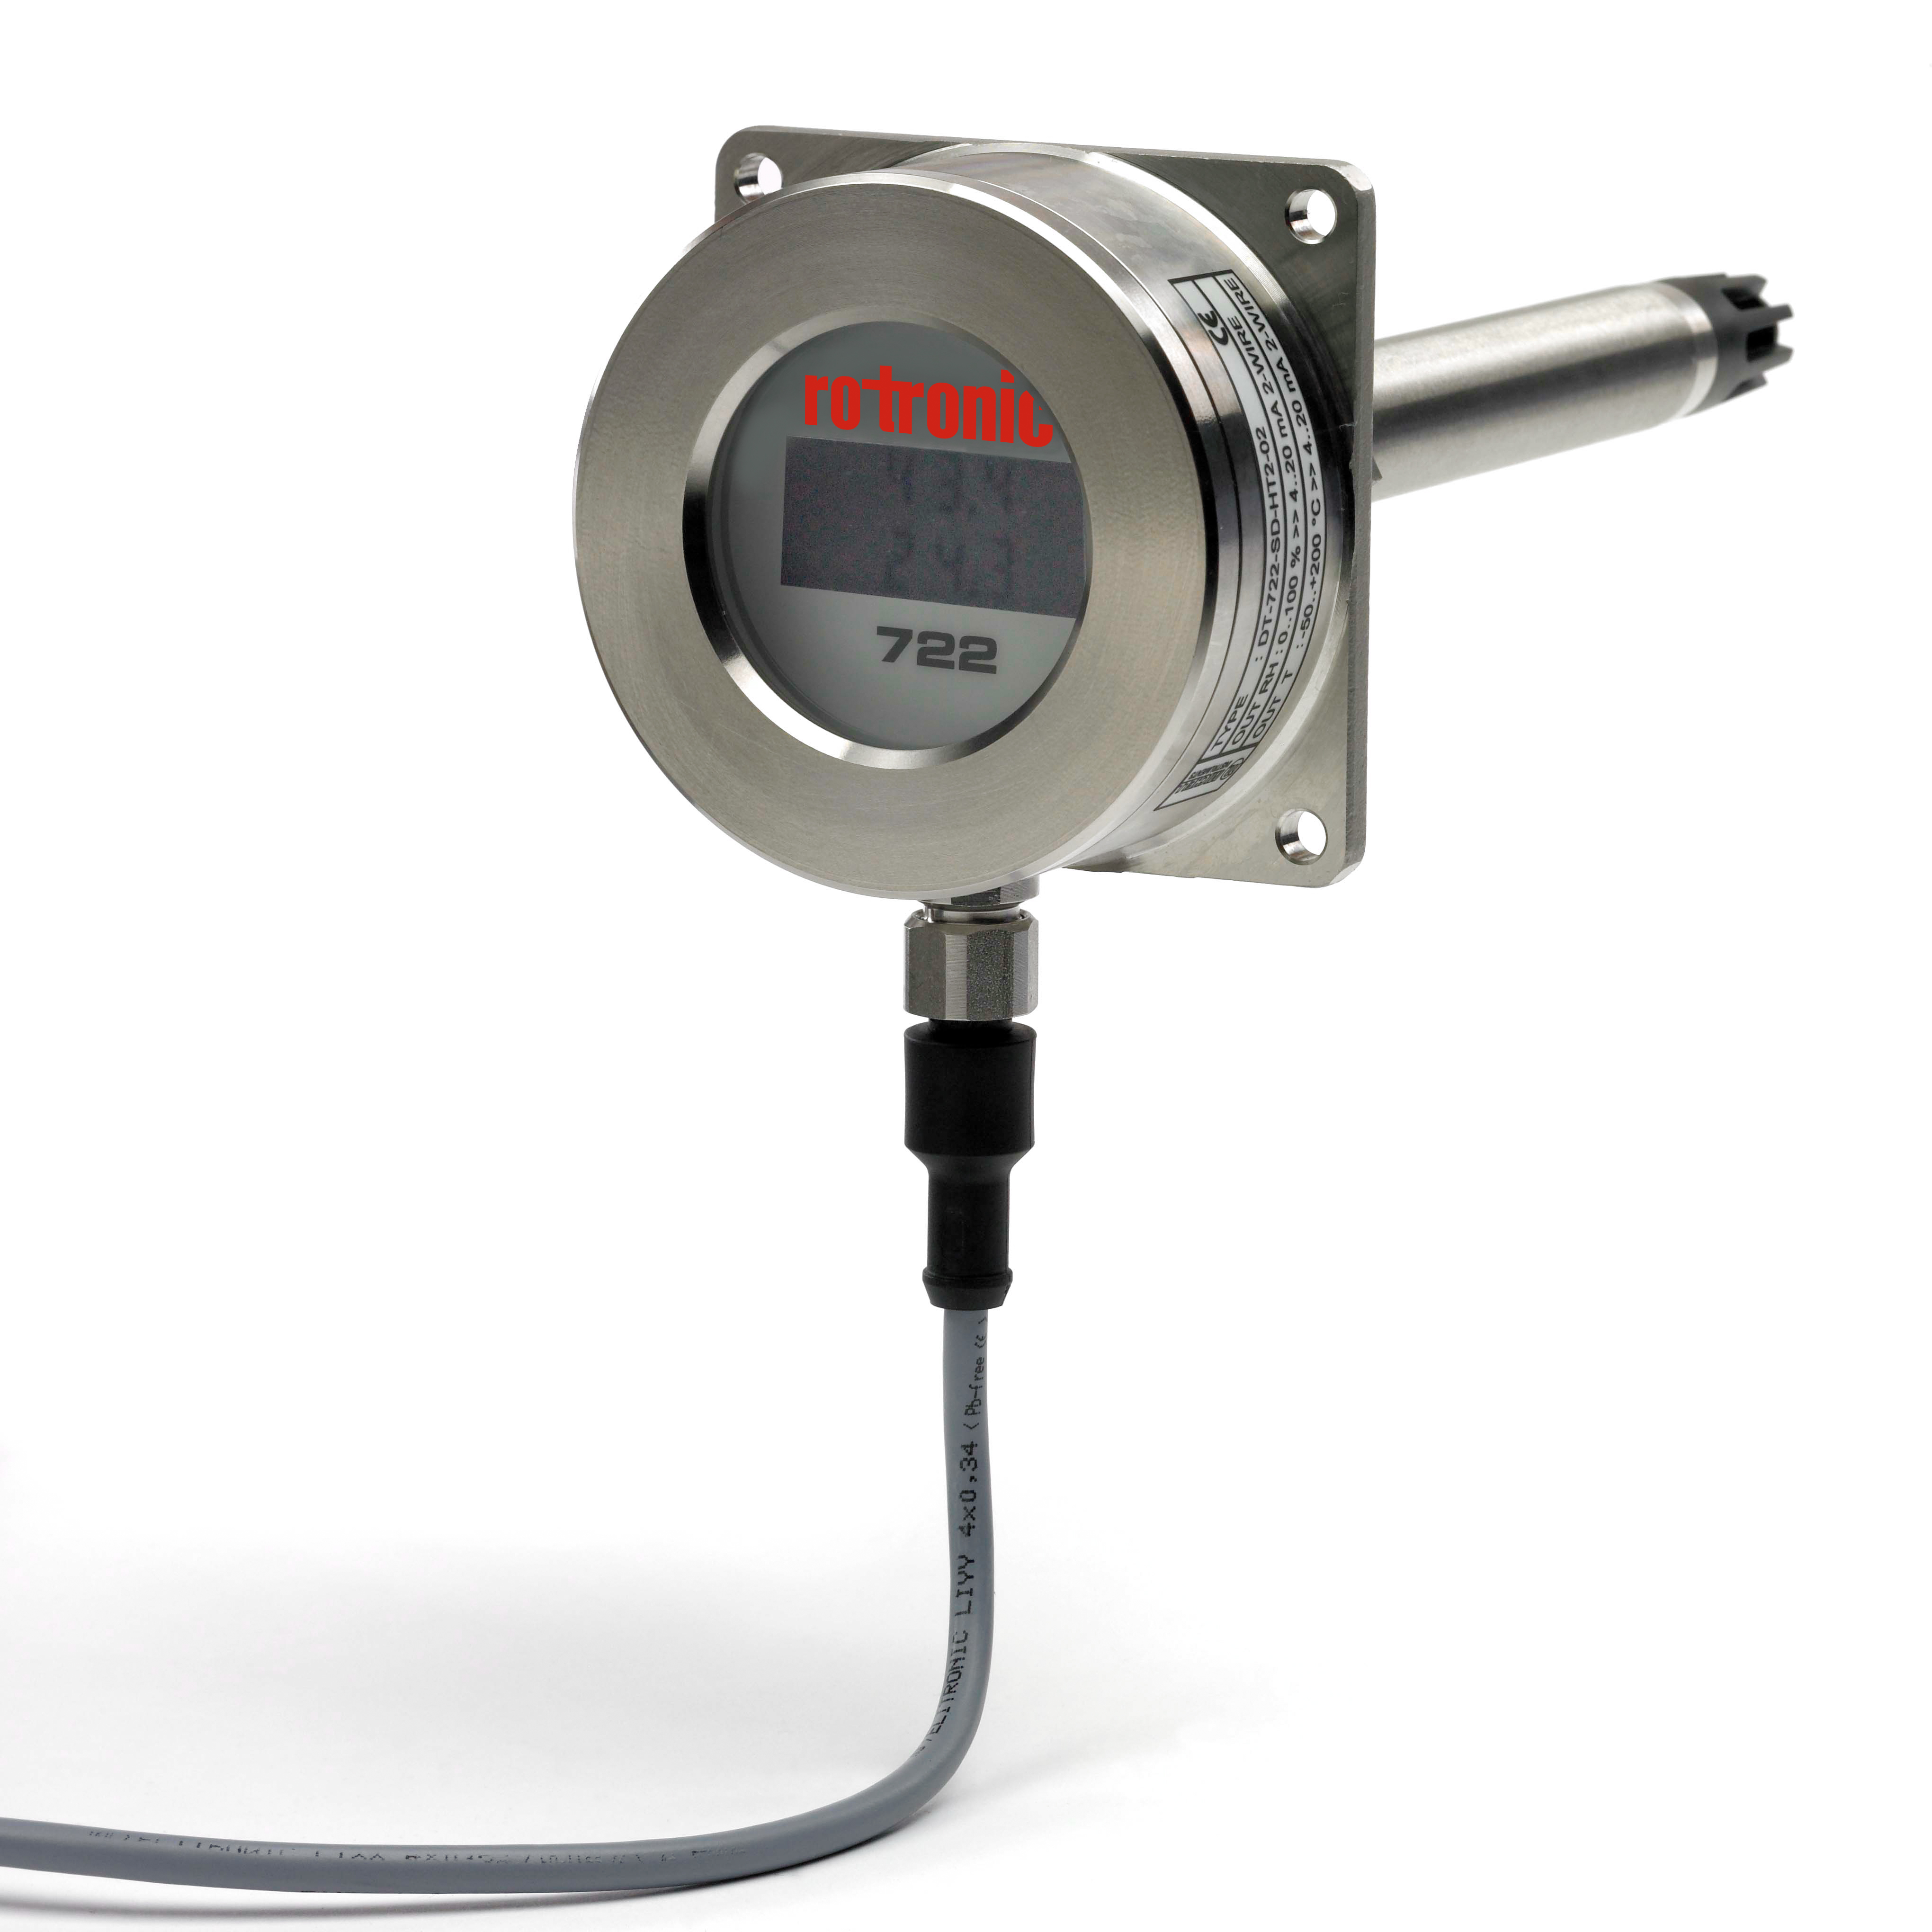 Heavy Duty Humidity and Temperature Transmitter  - Rotronic DT722
